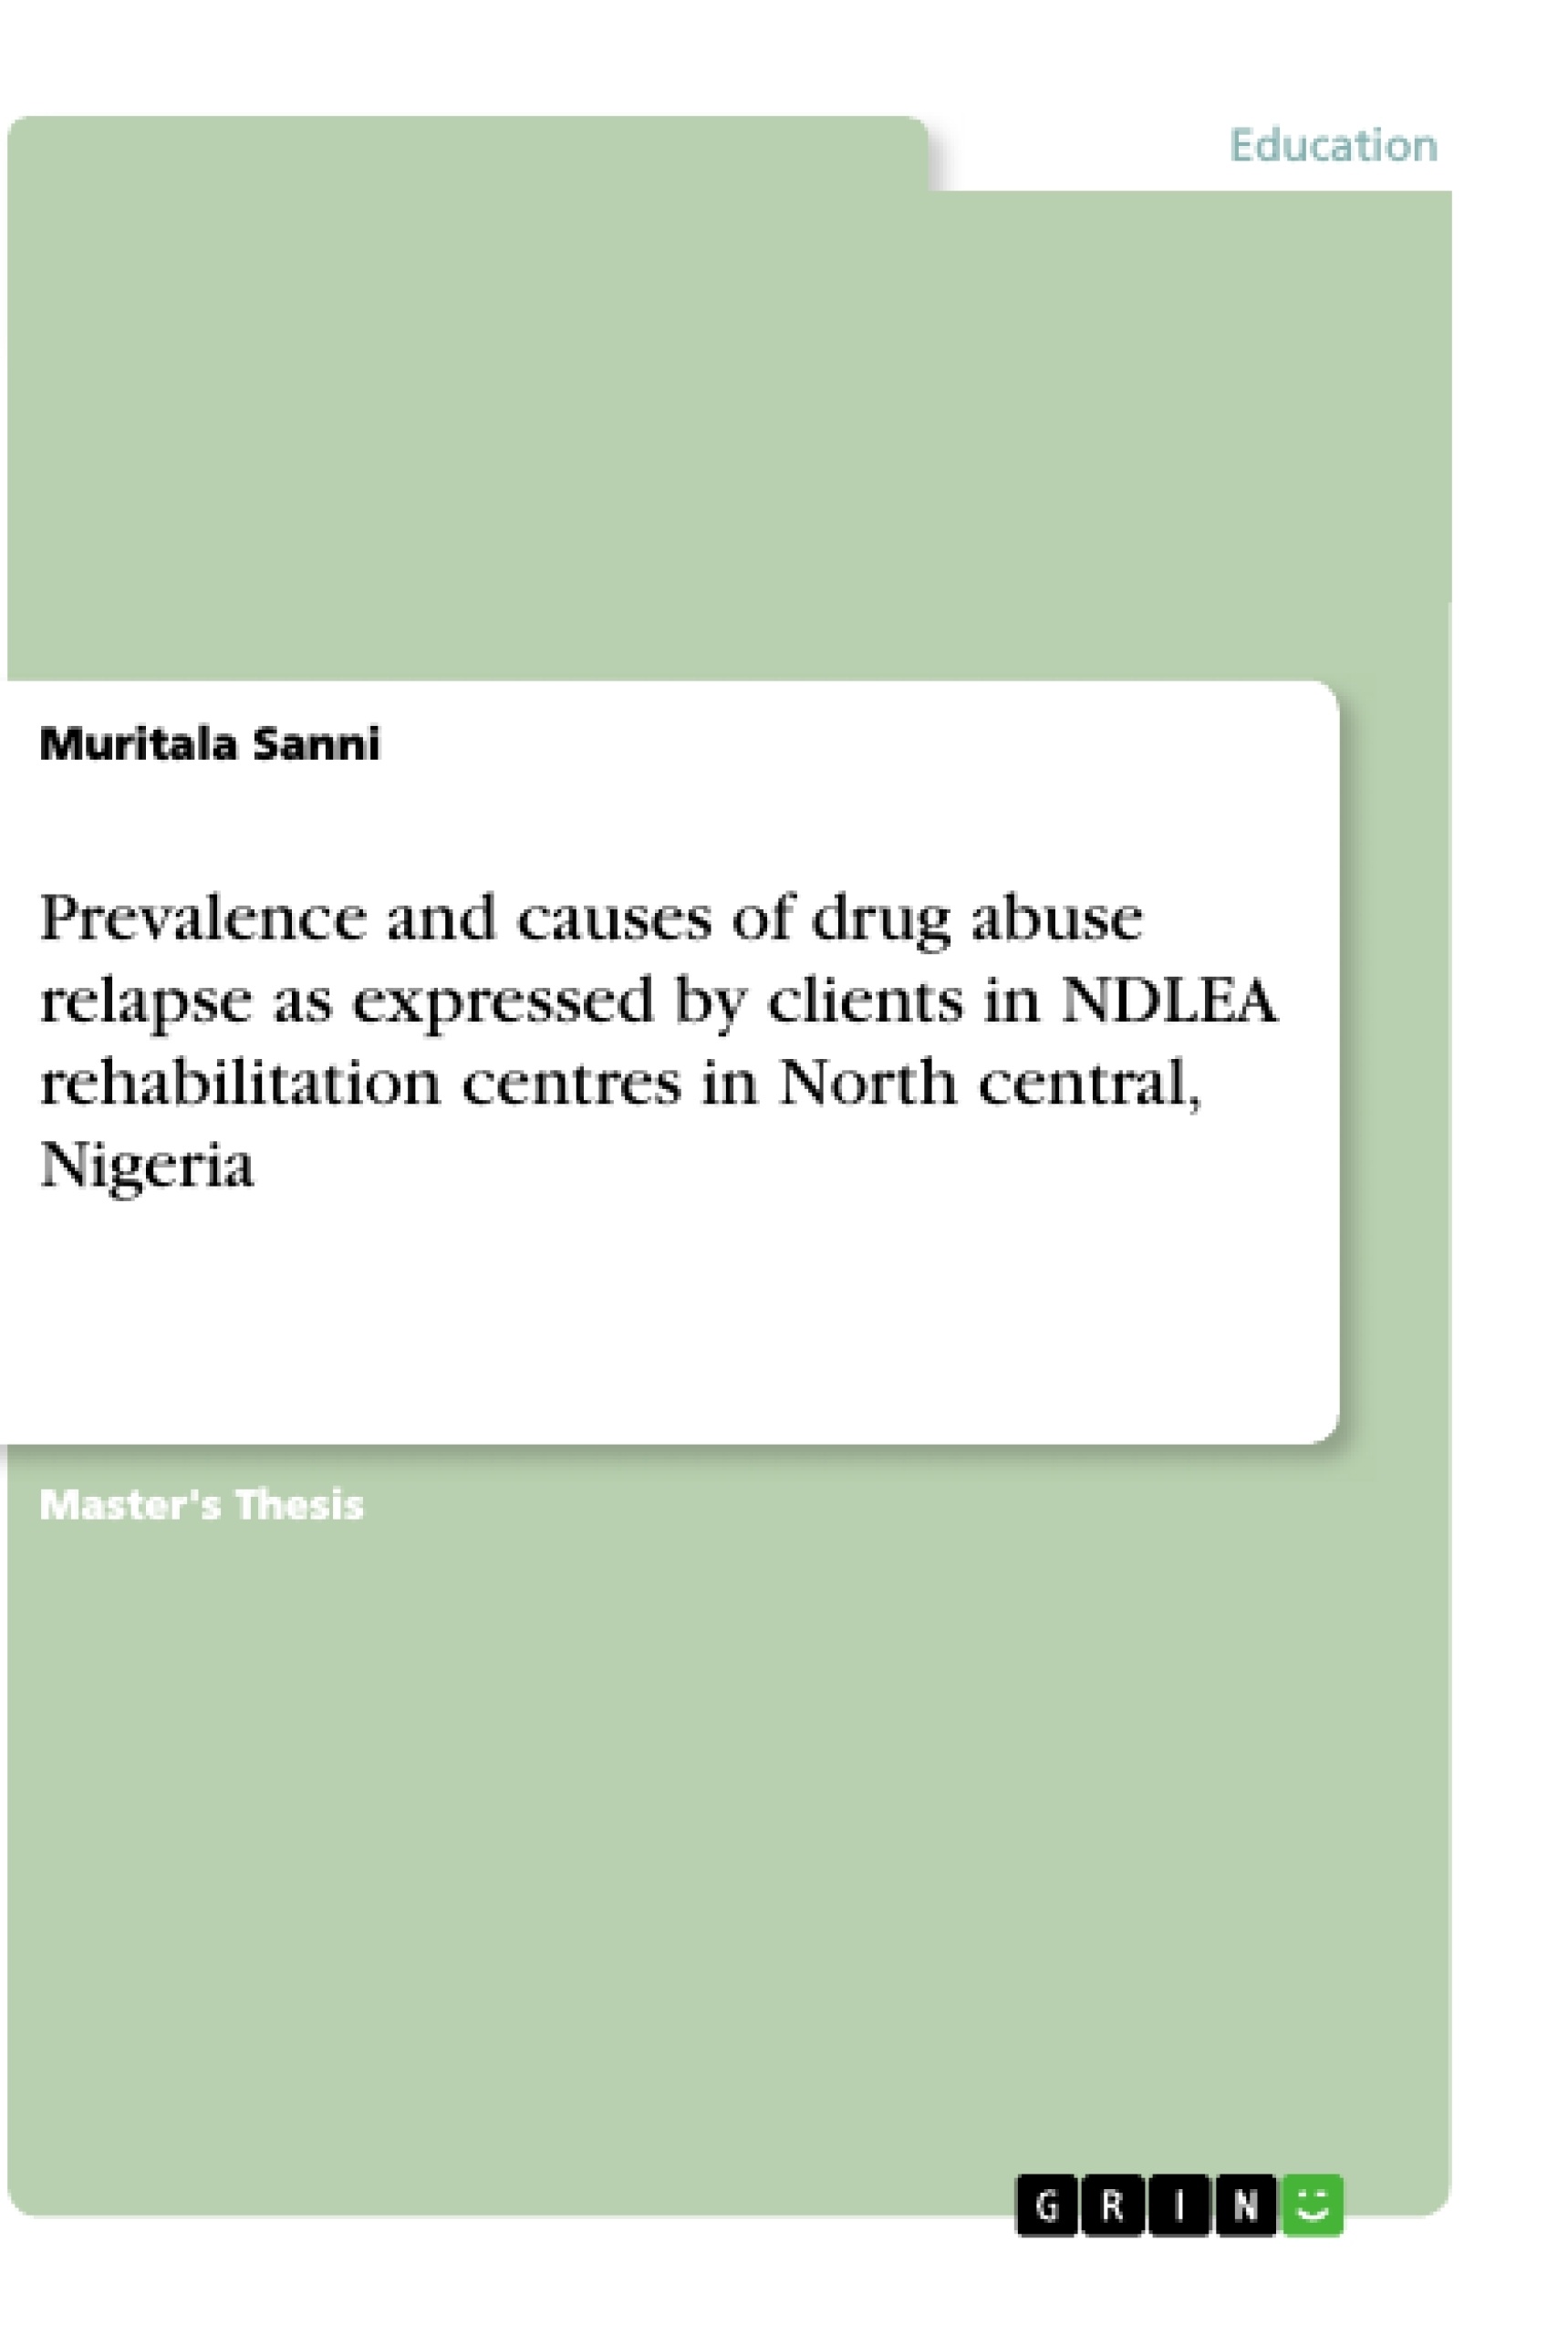 Titre: Prevalence and causes of drug abuse relapse as expressed by clients in NDLEA rehabilitation centres in North central, Nigeria